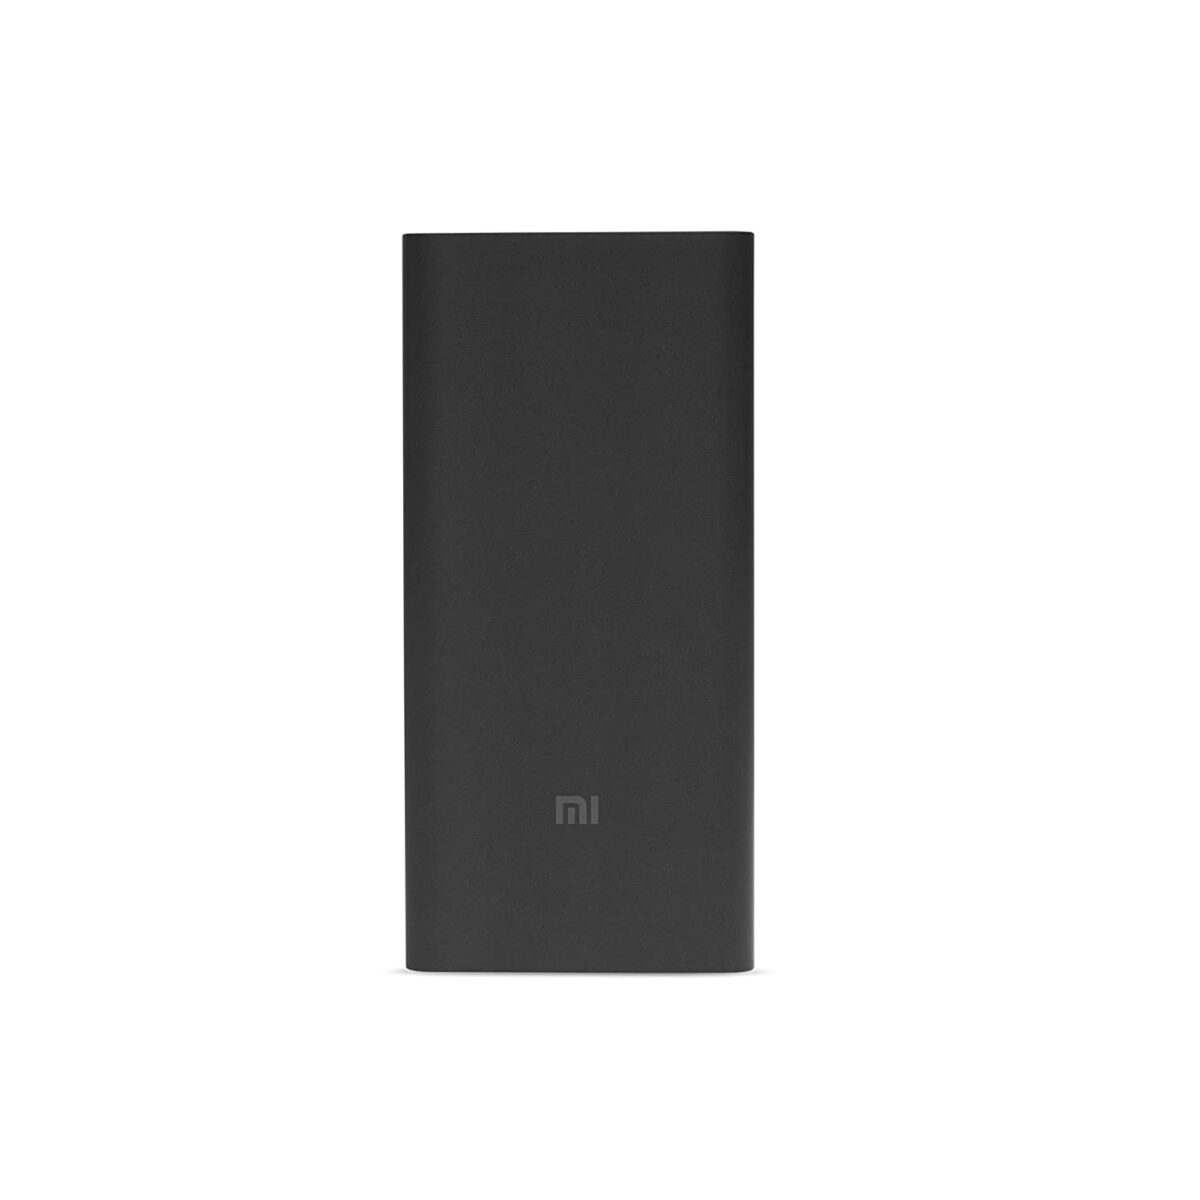 Mi Wireless Power Bank 10000mAh (Black, with Type-C Support, 18W Fast Charging)